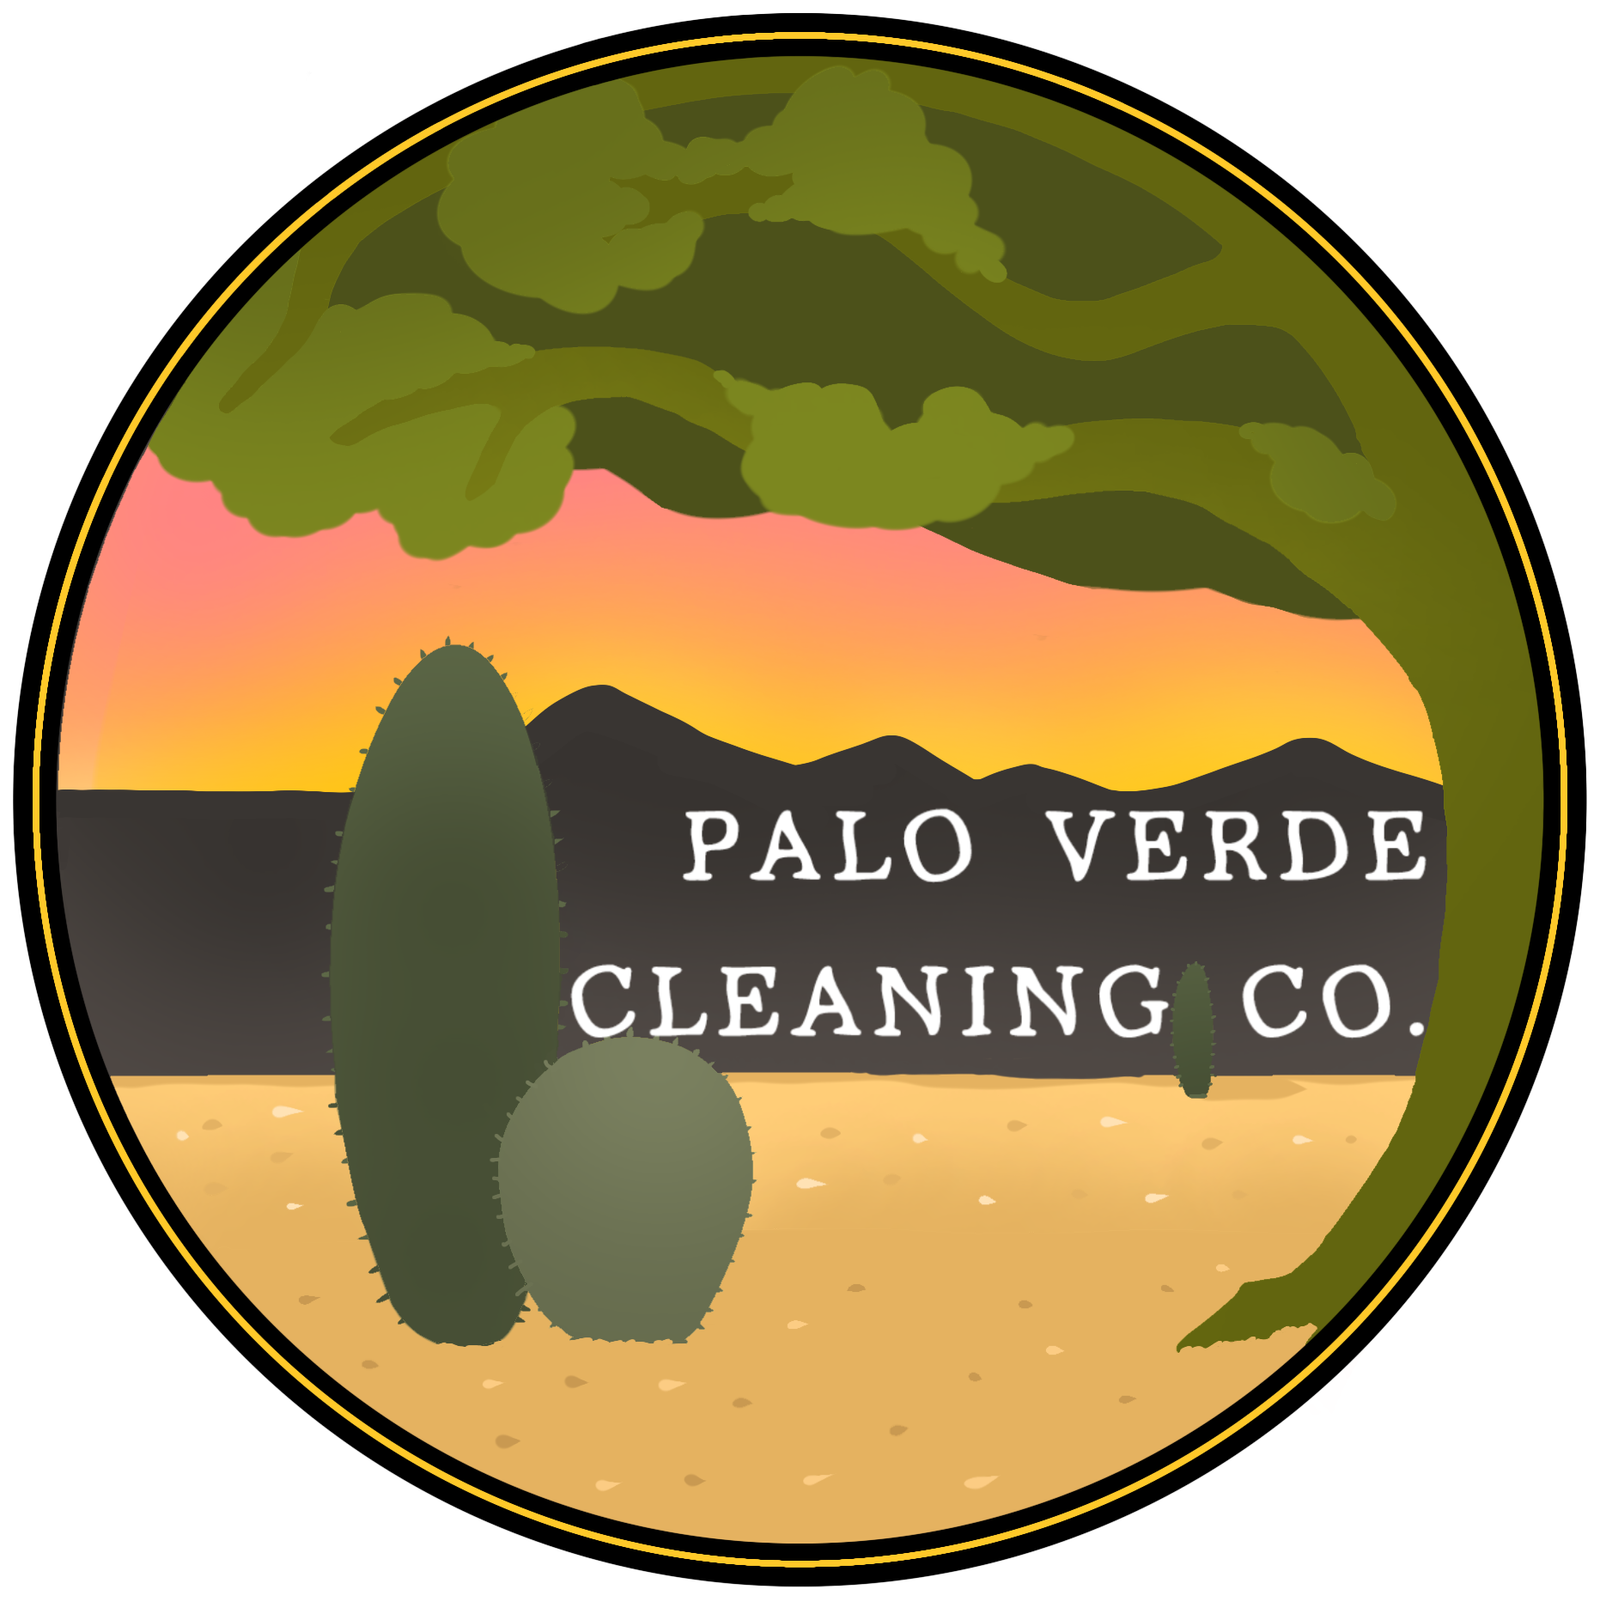 Commercial Cleaning - Services - Palo Verde Cleaning Co.